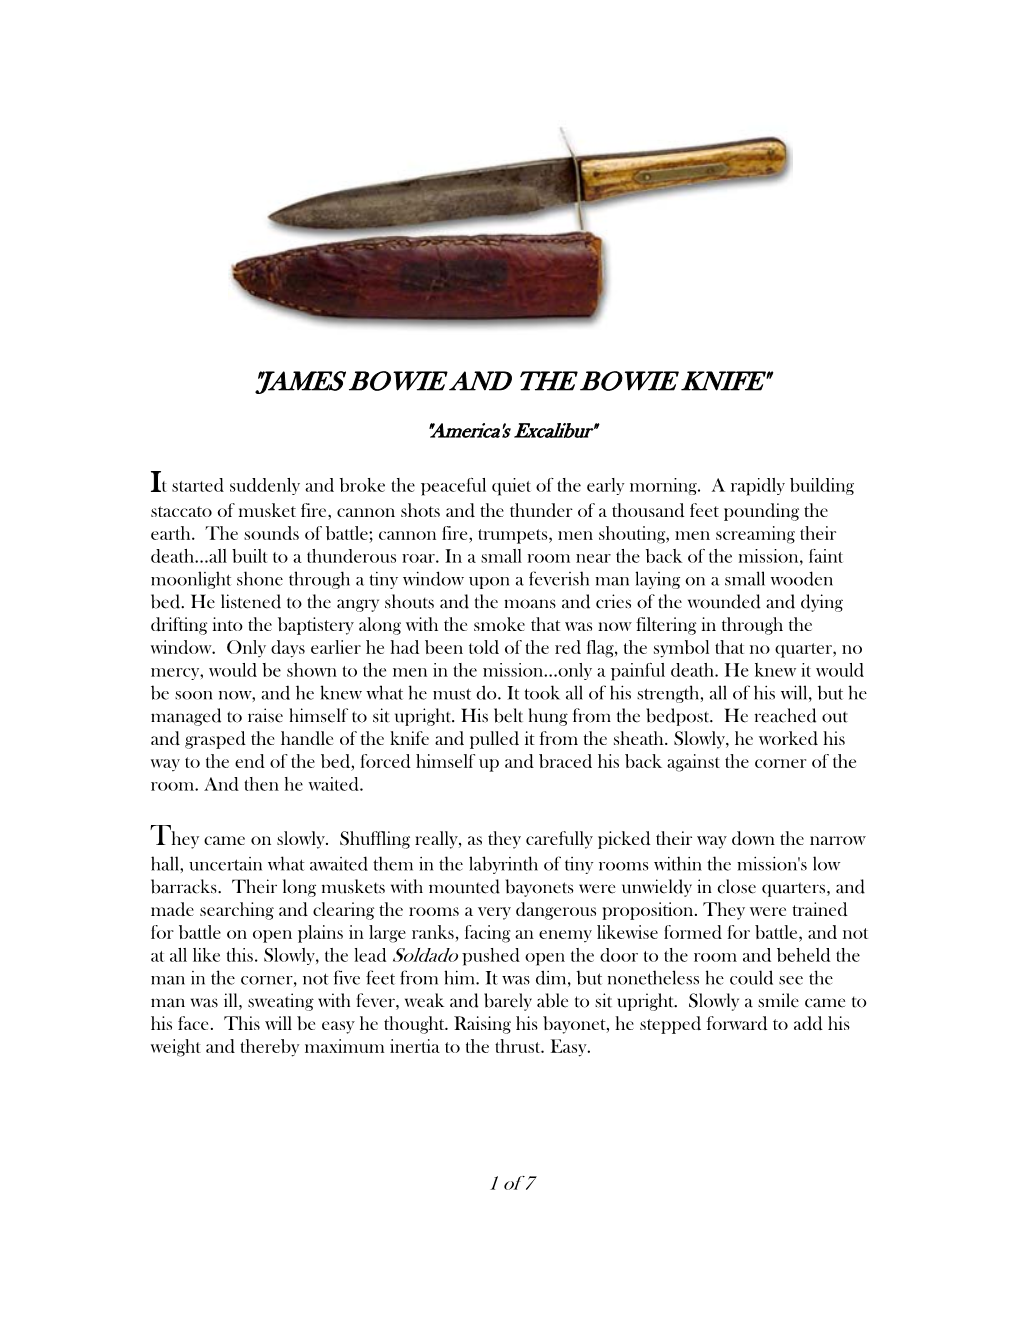 "James Bowie and the Bowie Knife"